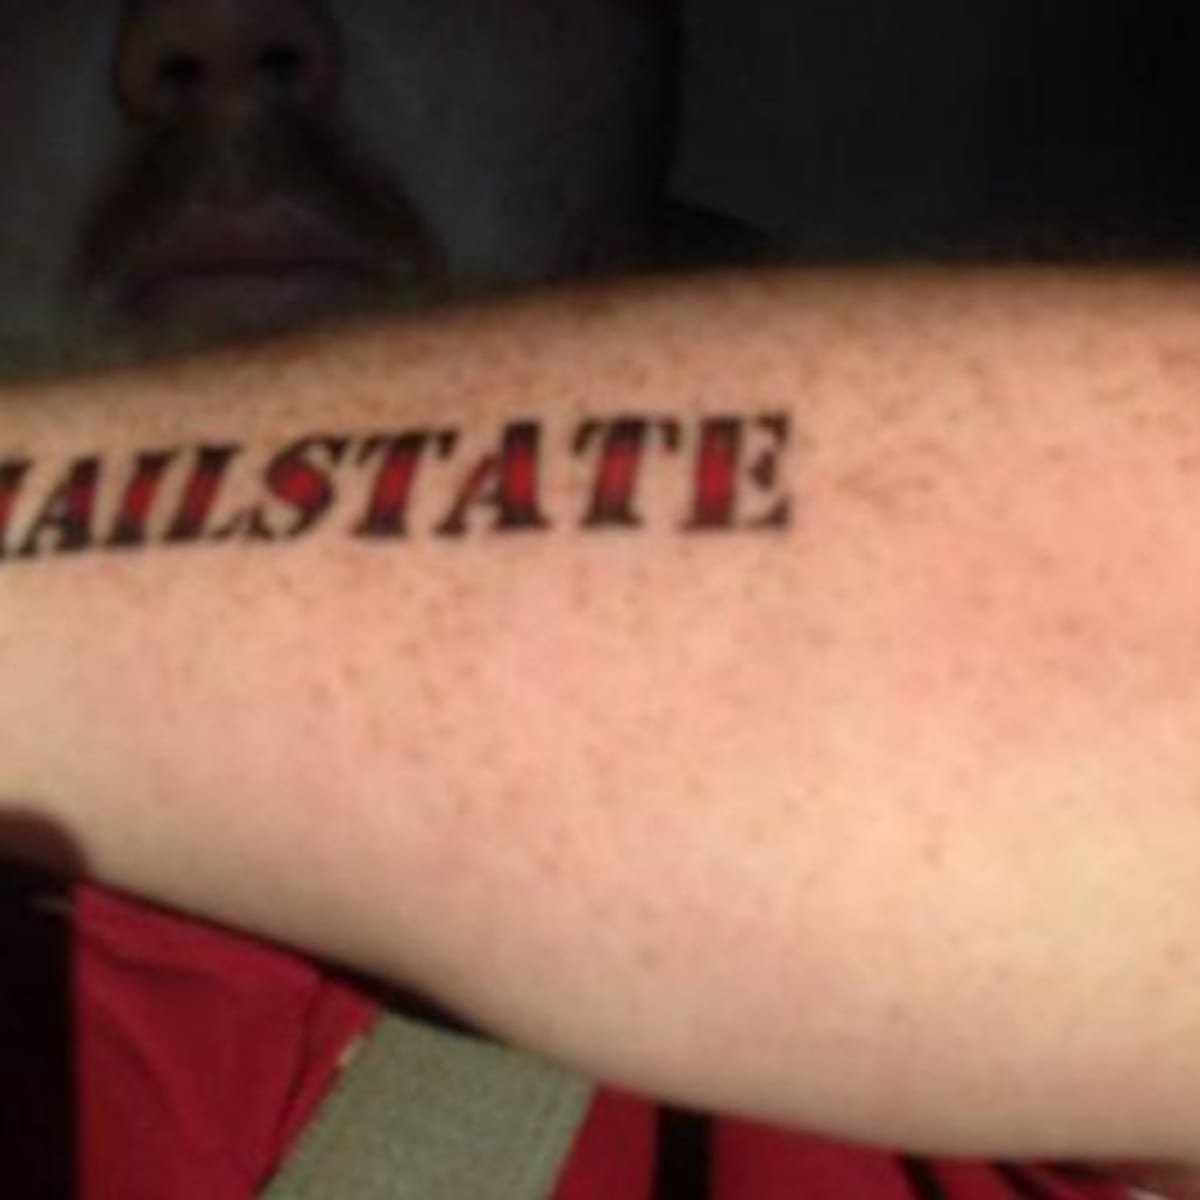 Mississippi State fan gets '#HAILSTATE' tattoo - Sports Illustrated